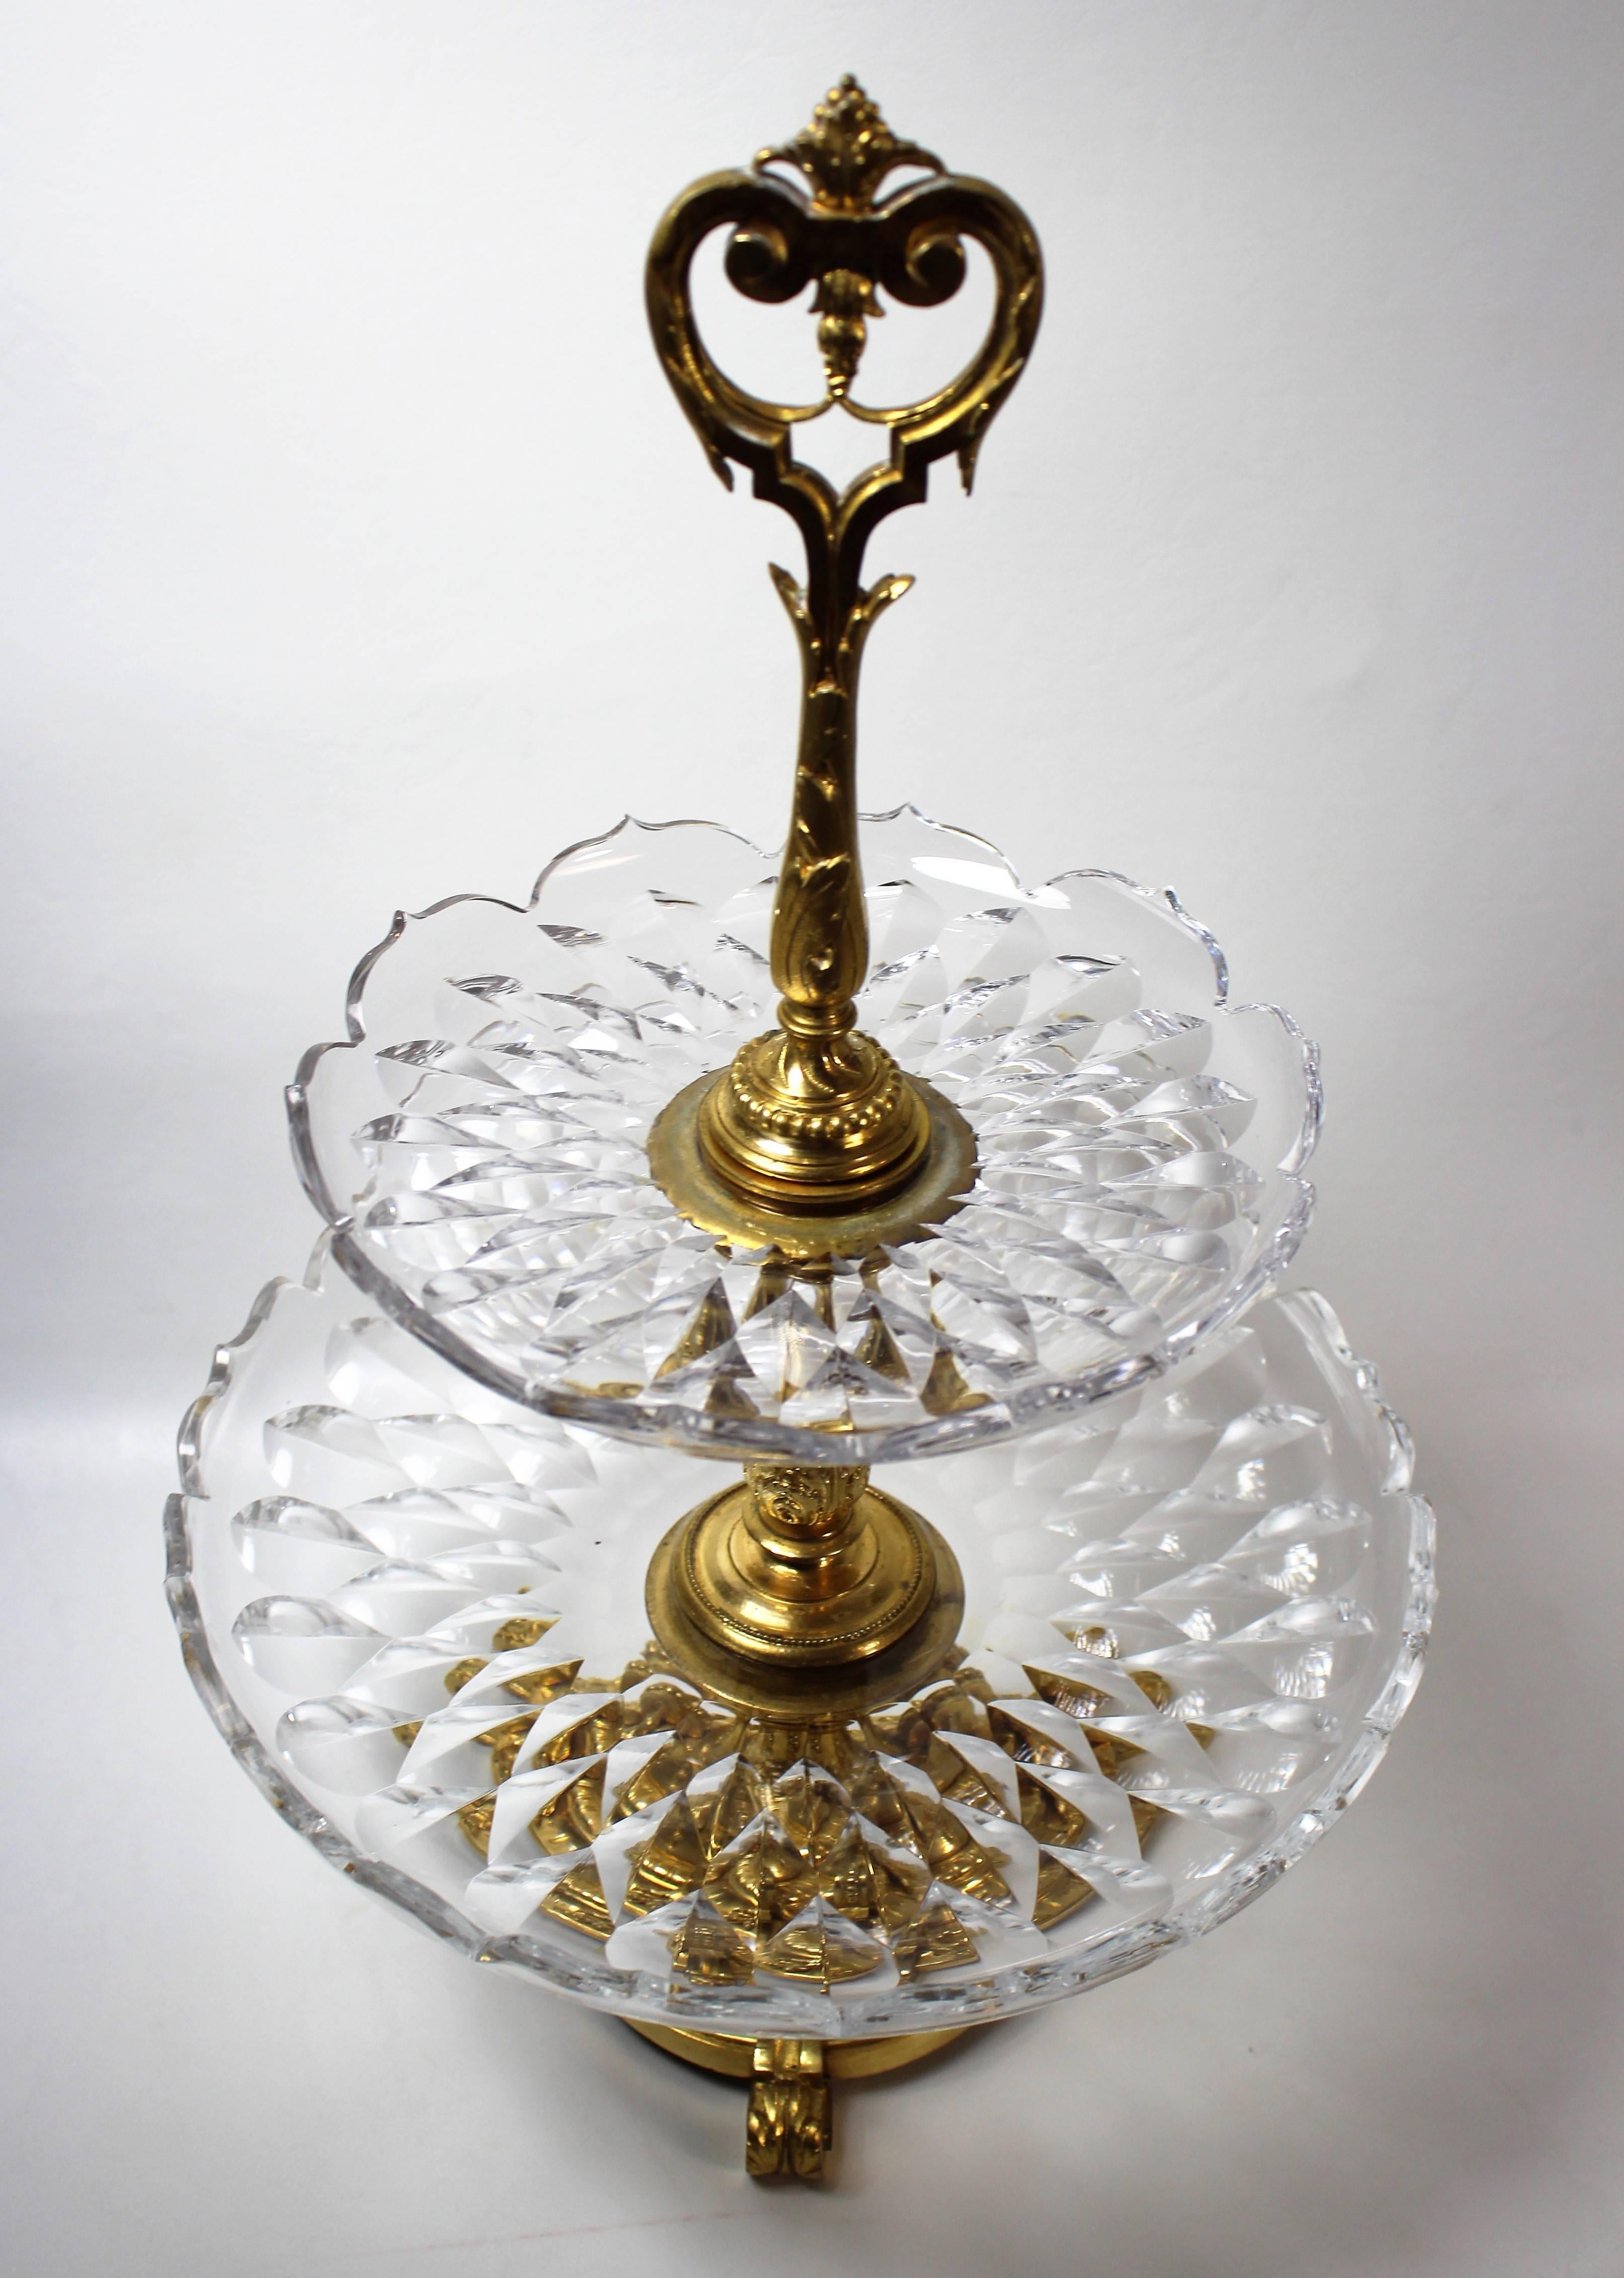 French gilt bronze and cut crystal two-tier surtout de table or centerpiece tazza.